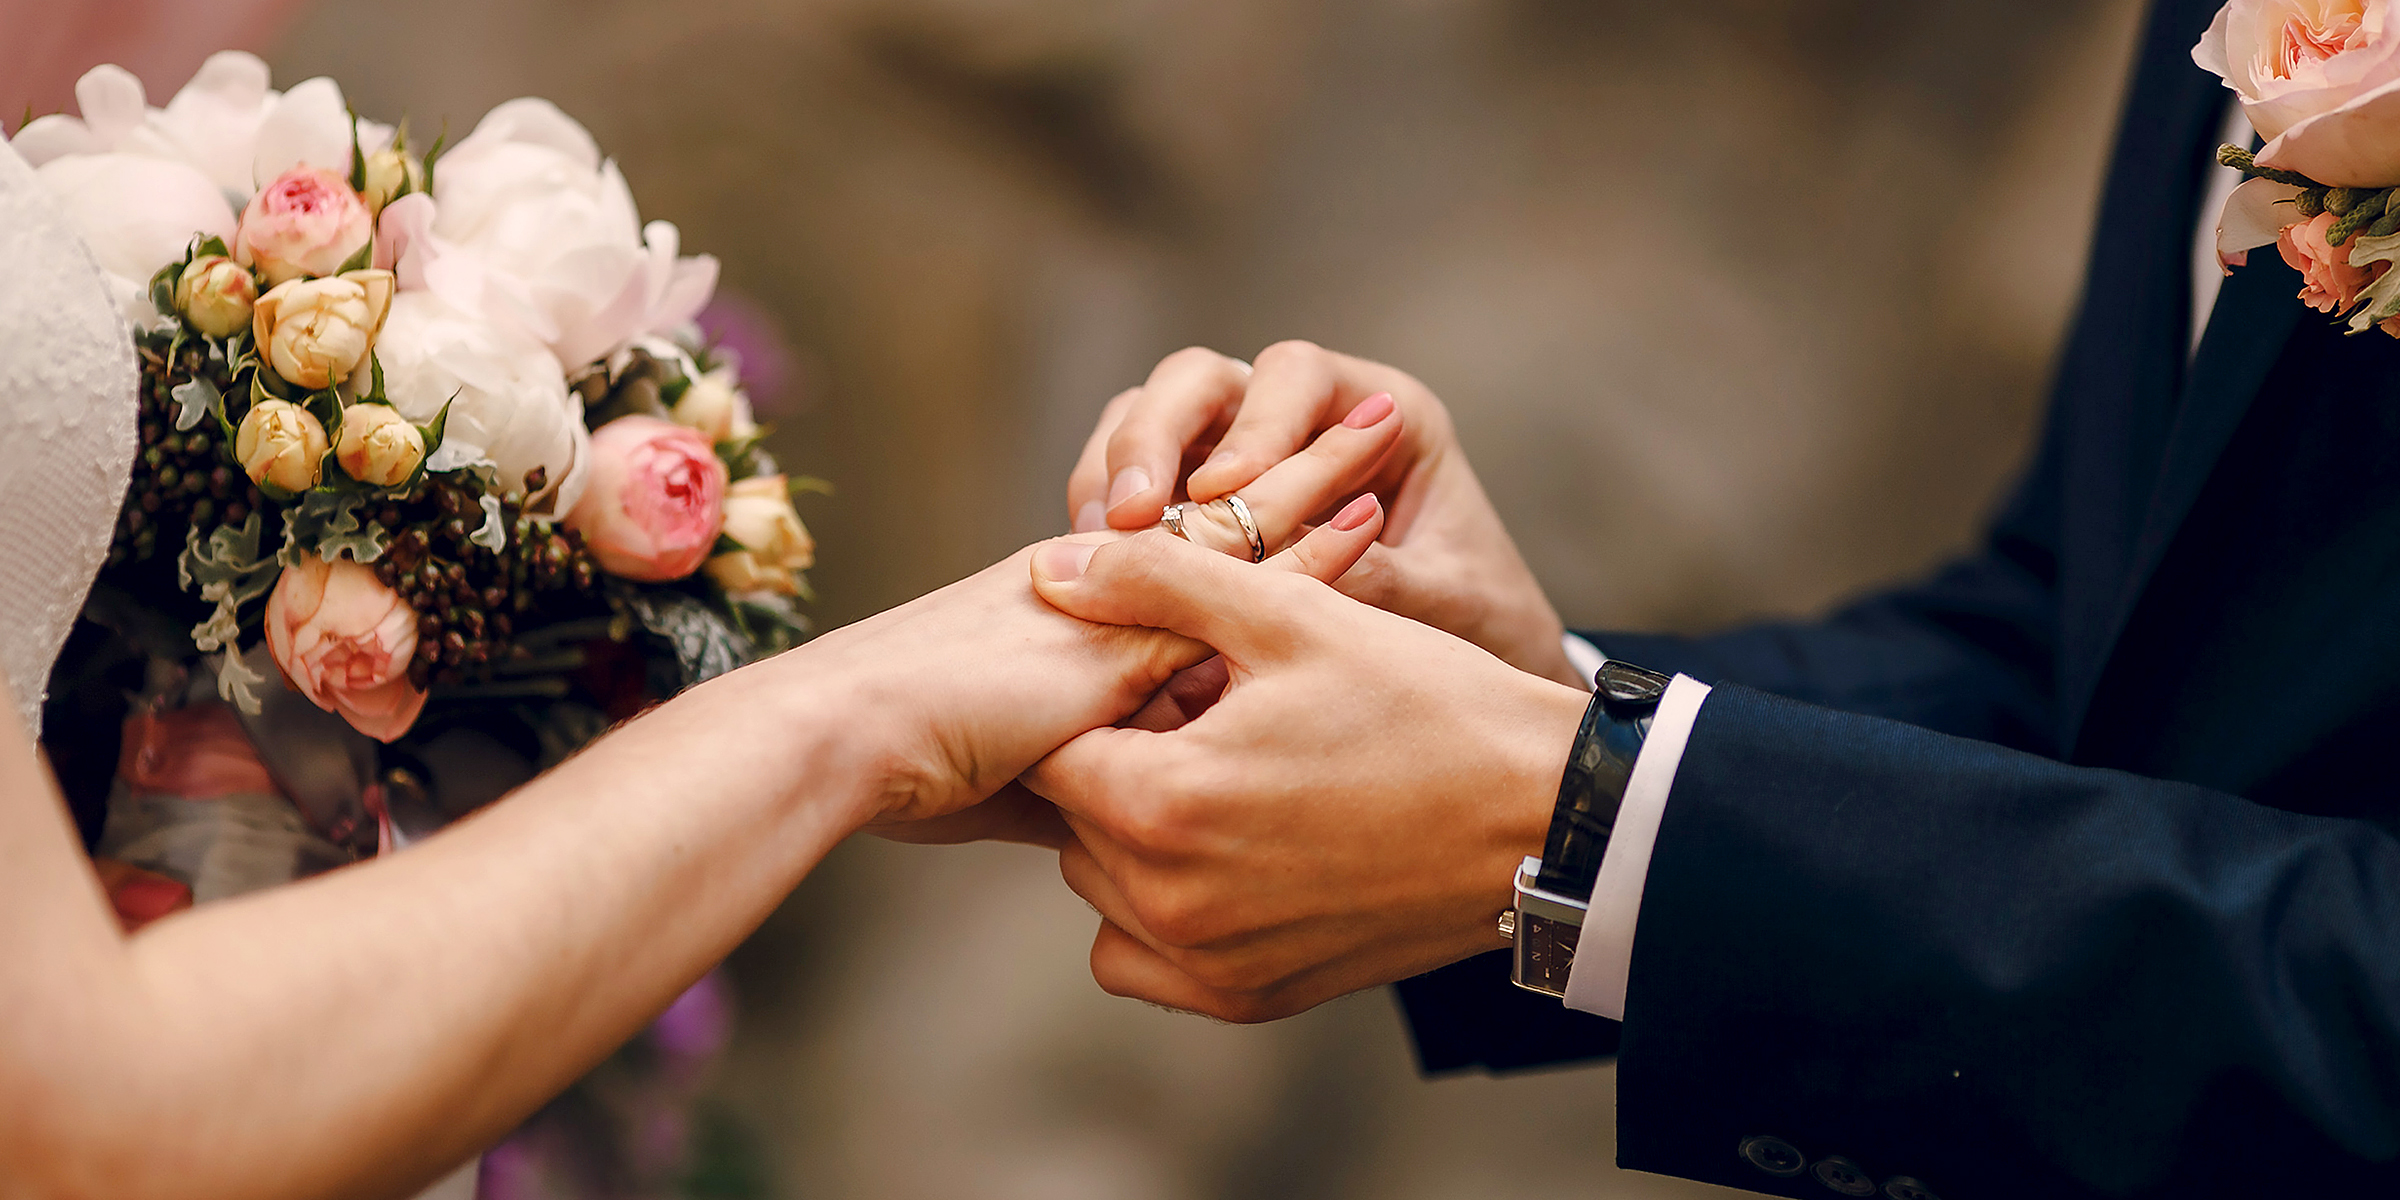 A man putting a ring on his bride's finger | Source: Shutterstock